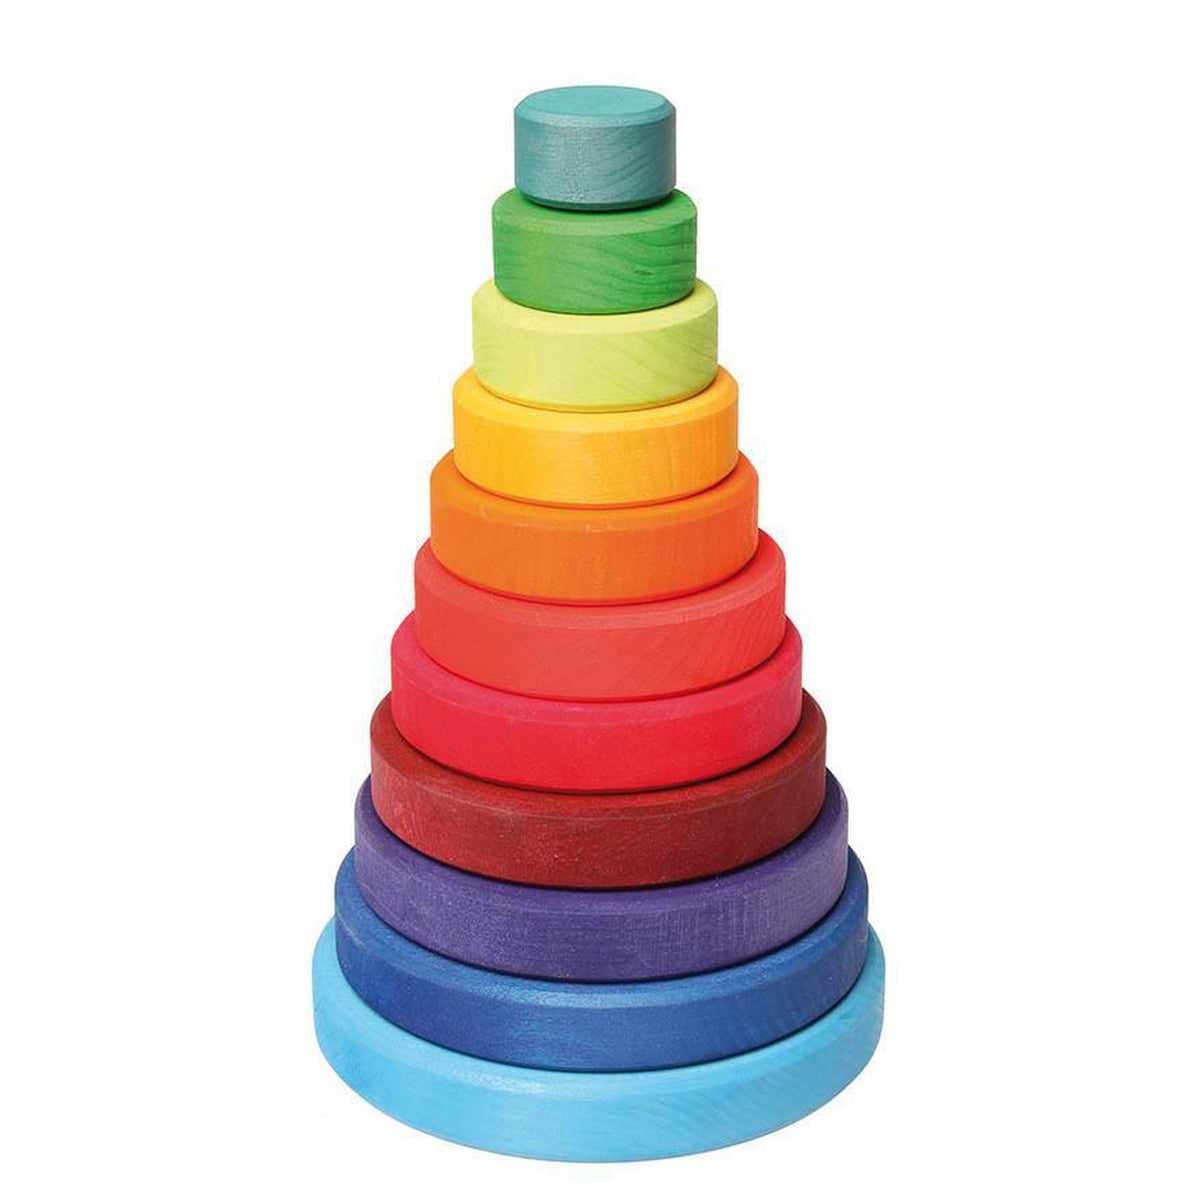 Cork Block Stacking Toys Recalled by A Harvest Company